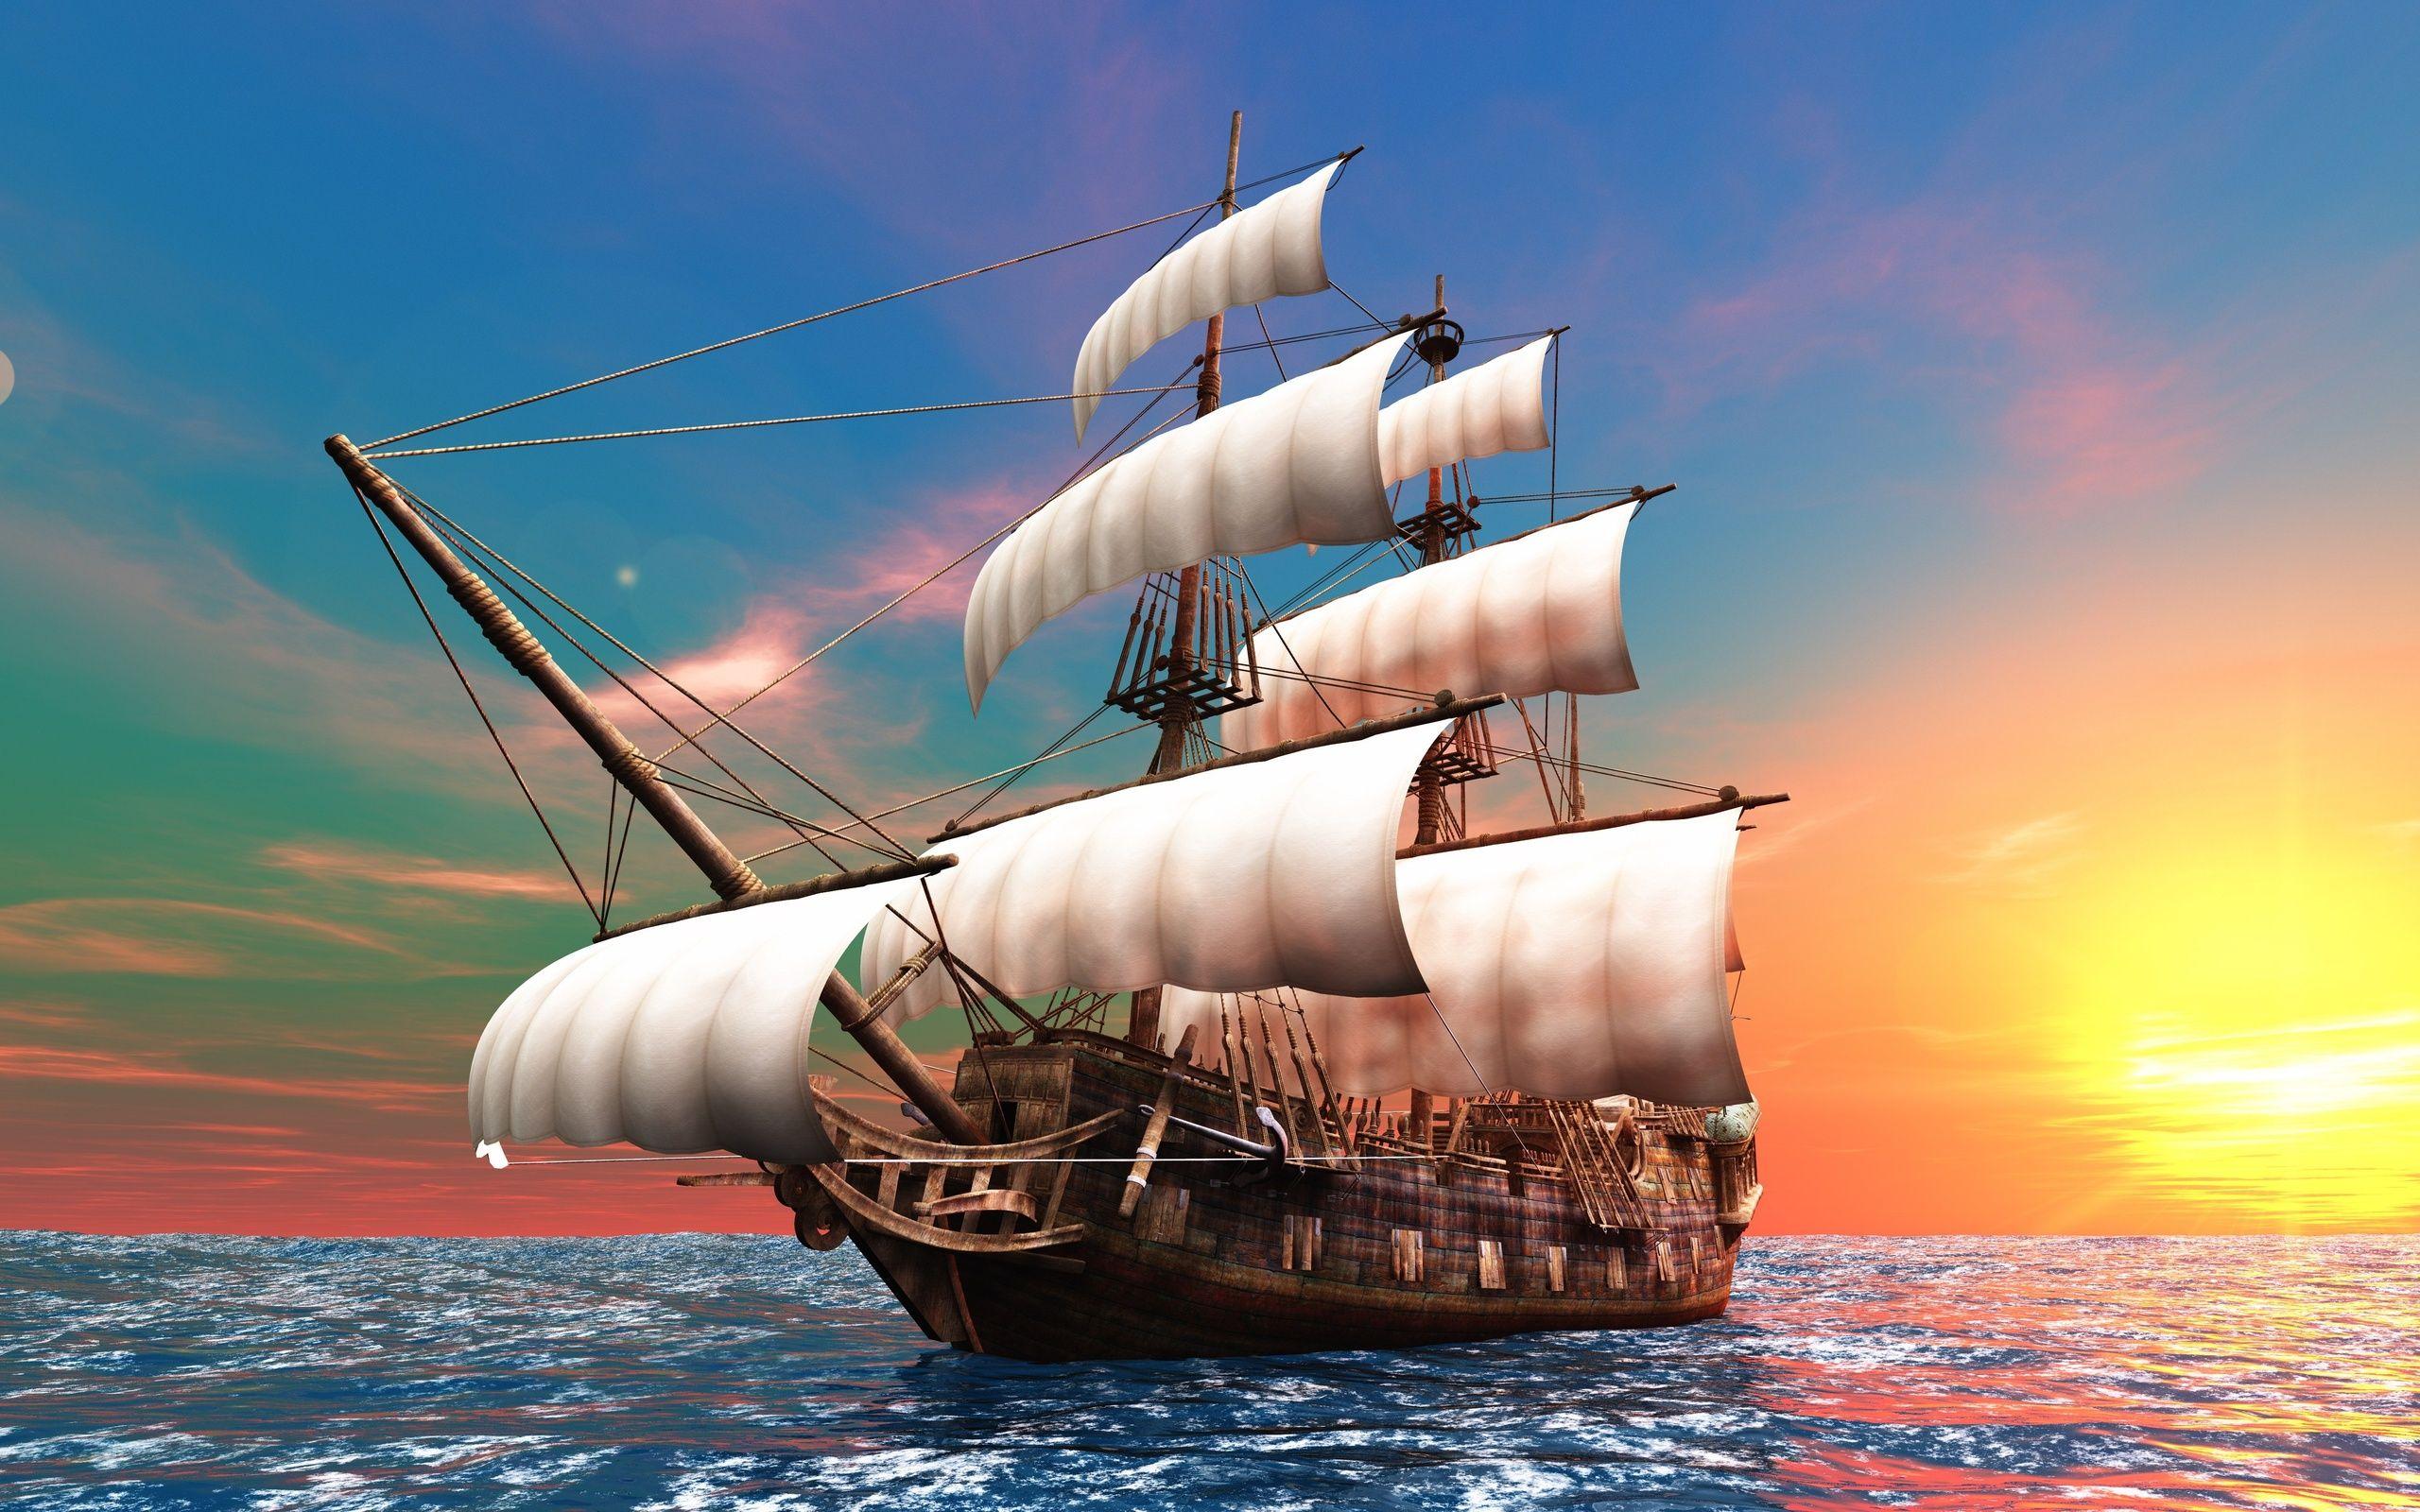 Black Pearl Ship Wallpapers - Top Free Black Pearl Ship Backgrounds